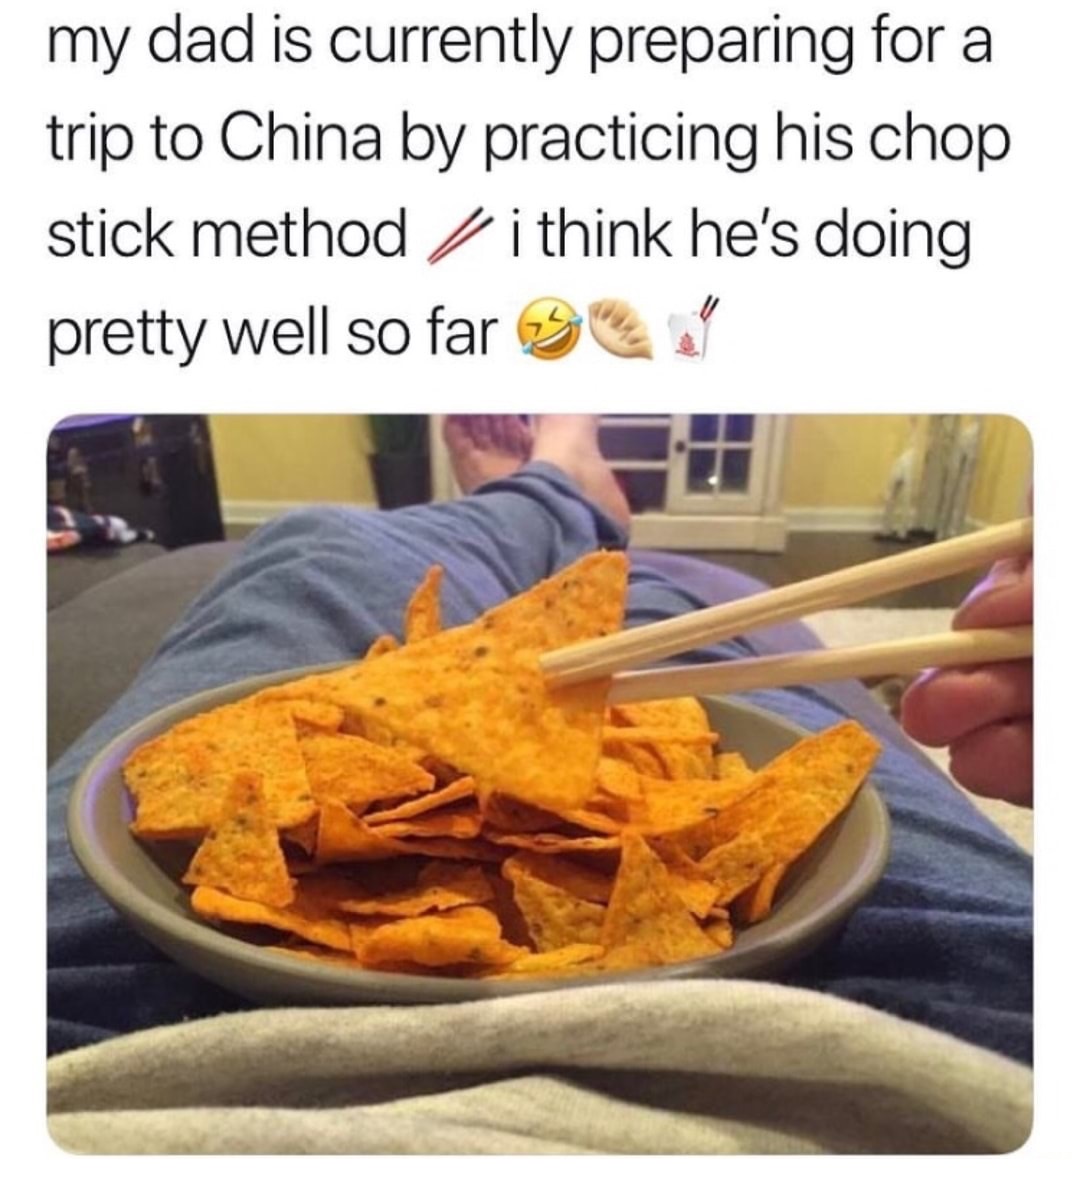 memes - tortilla chip - my dad is currently preparing for a trip to China by practicing his chop stick method i think he's doing pretty well so far 90'